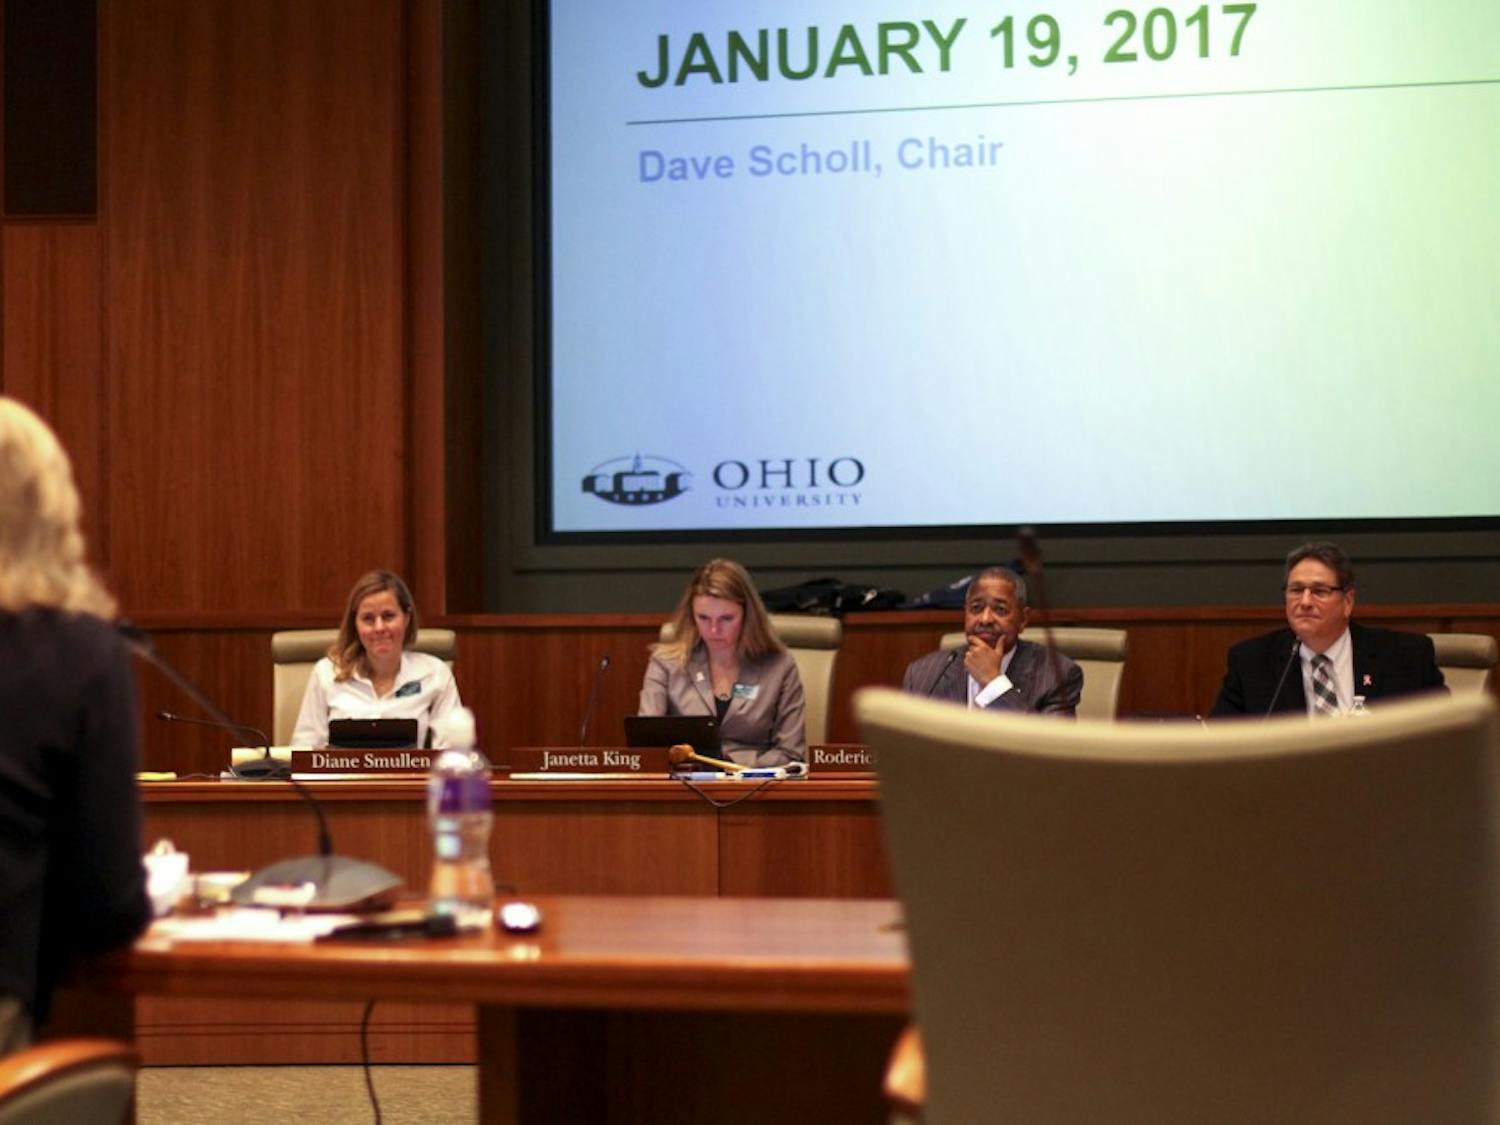 Members of Ohio's Board of Trustees listen to Deborah Shaffer, Vice President for Finance and Administration during a BOT meeting on January 19, 2017 in Walter Hall. 